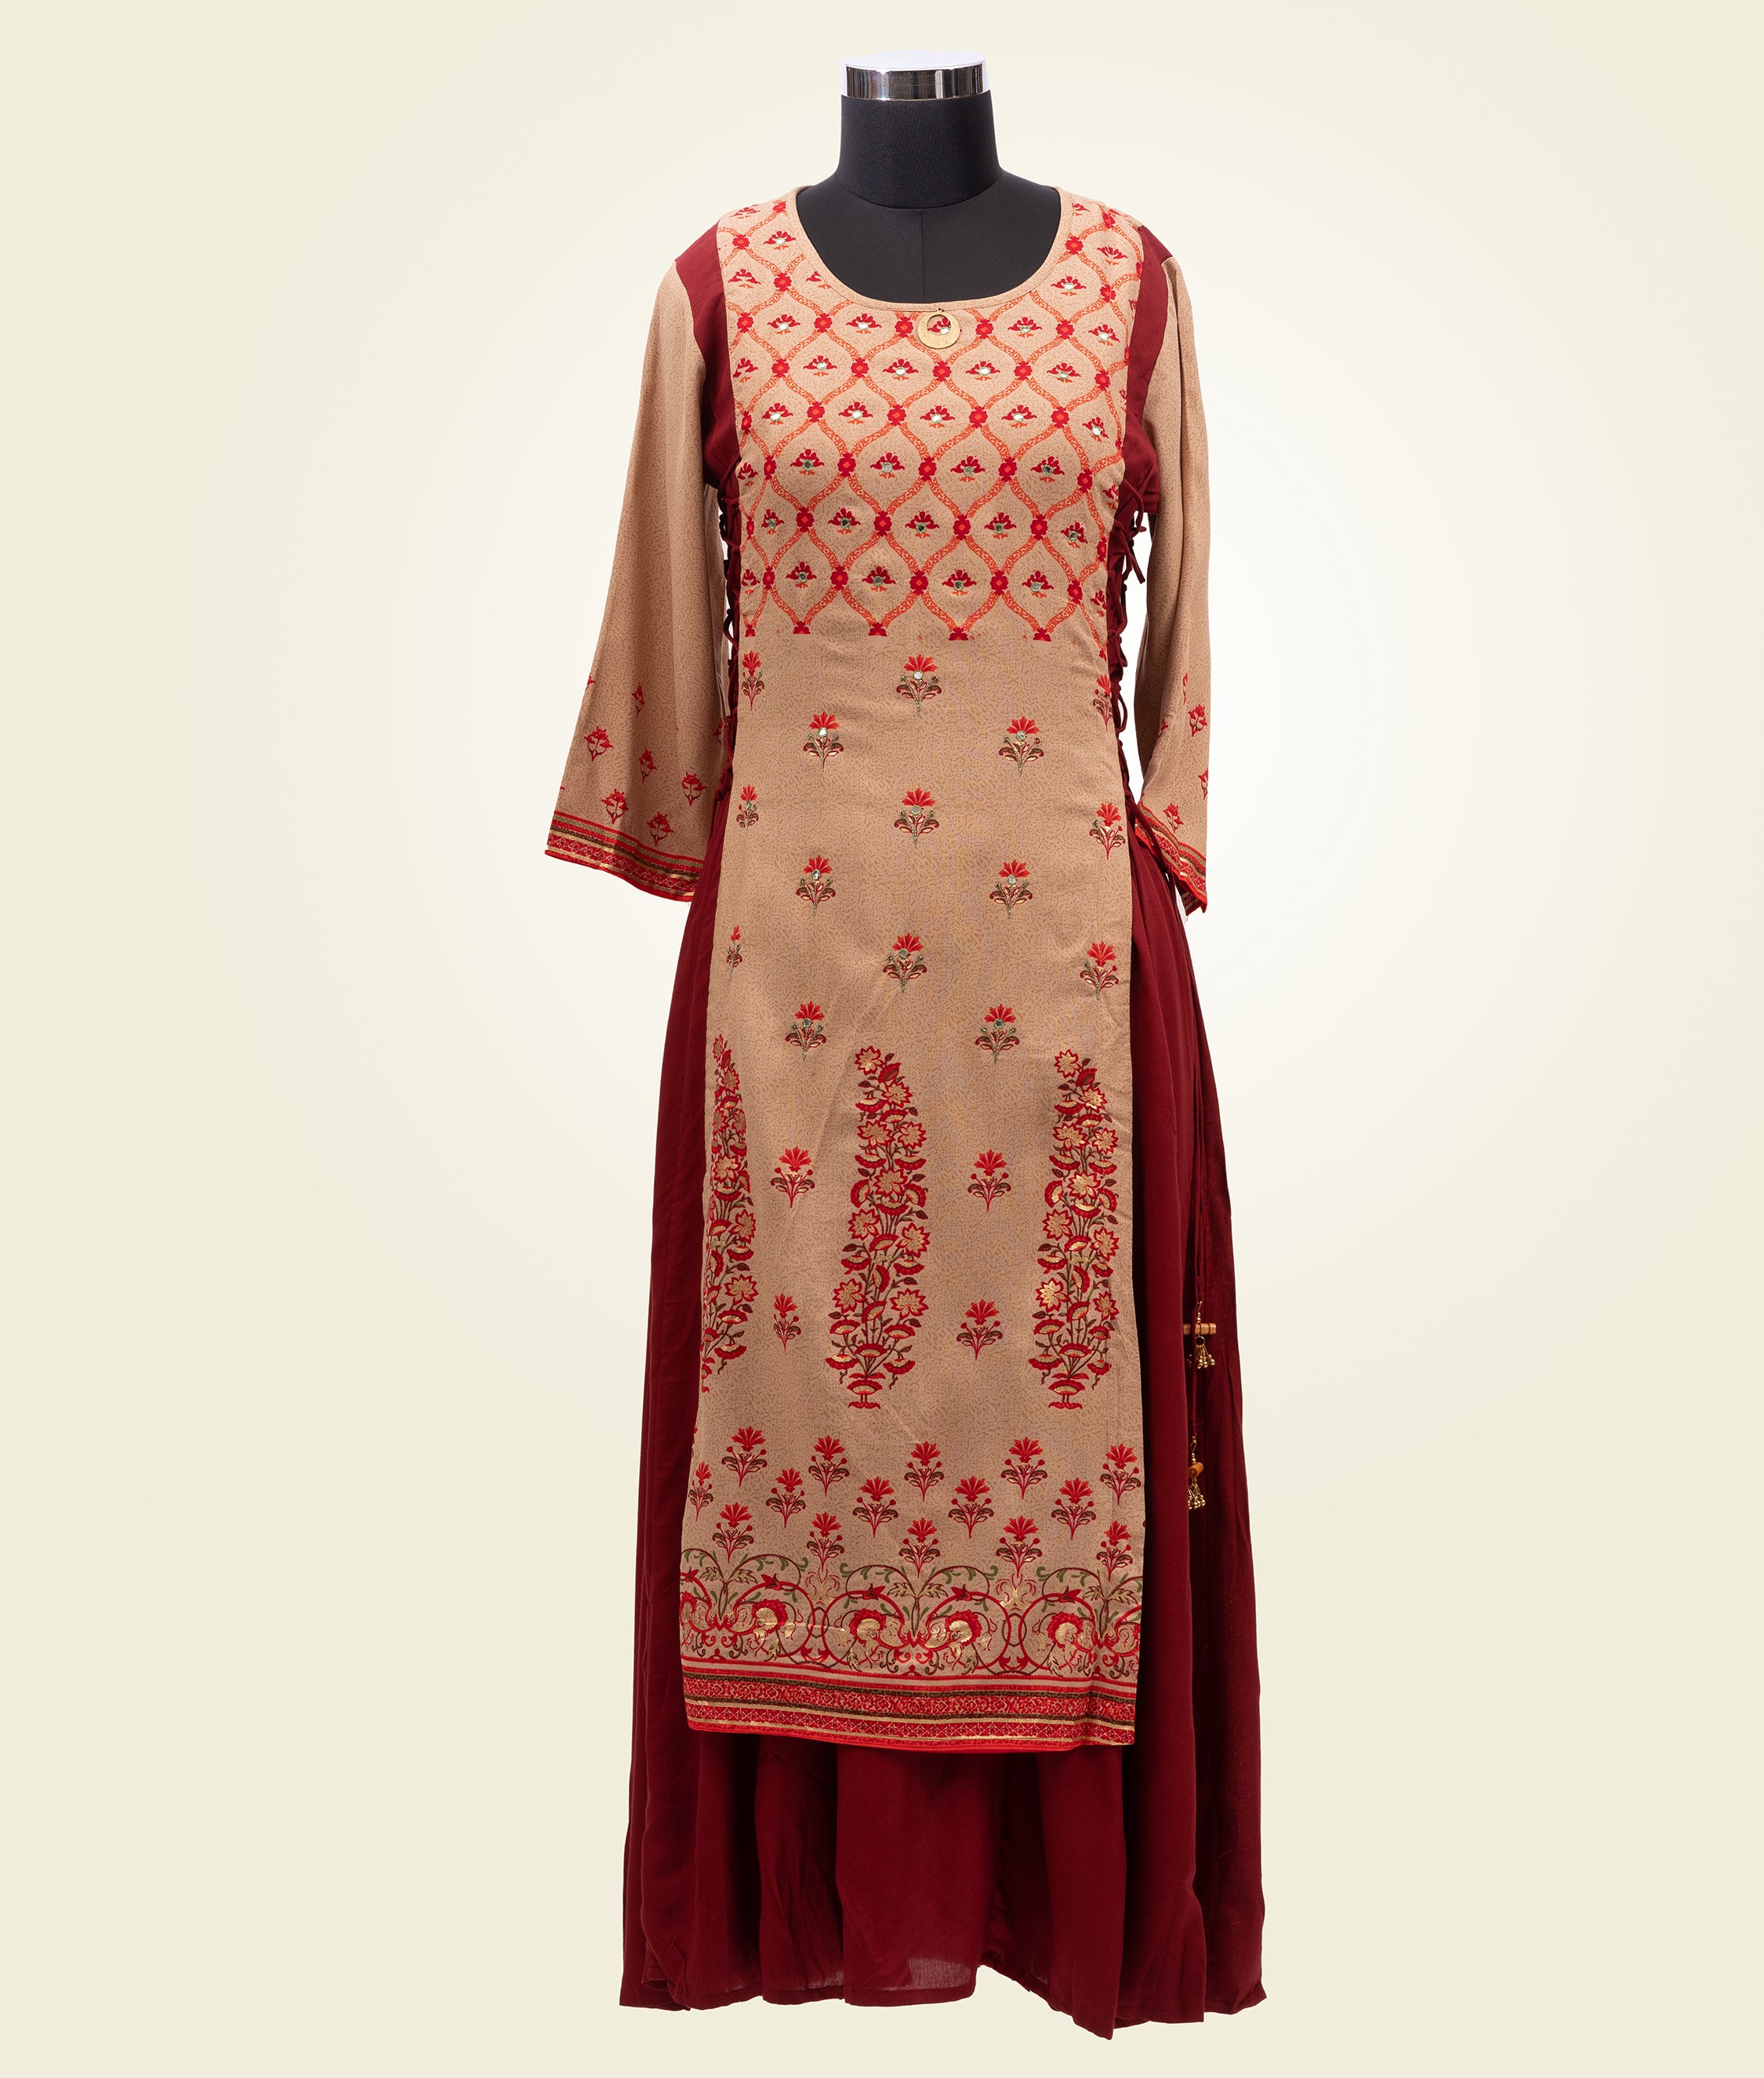 Two Layered Beige and Maroon Kurti With Print - kaystore.in